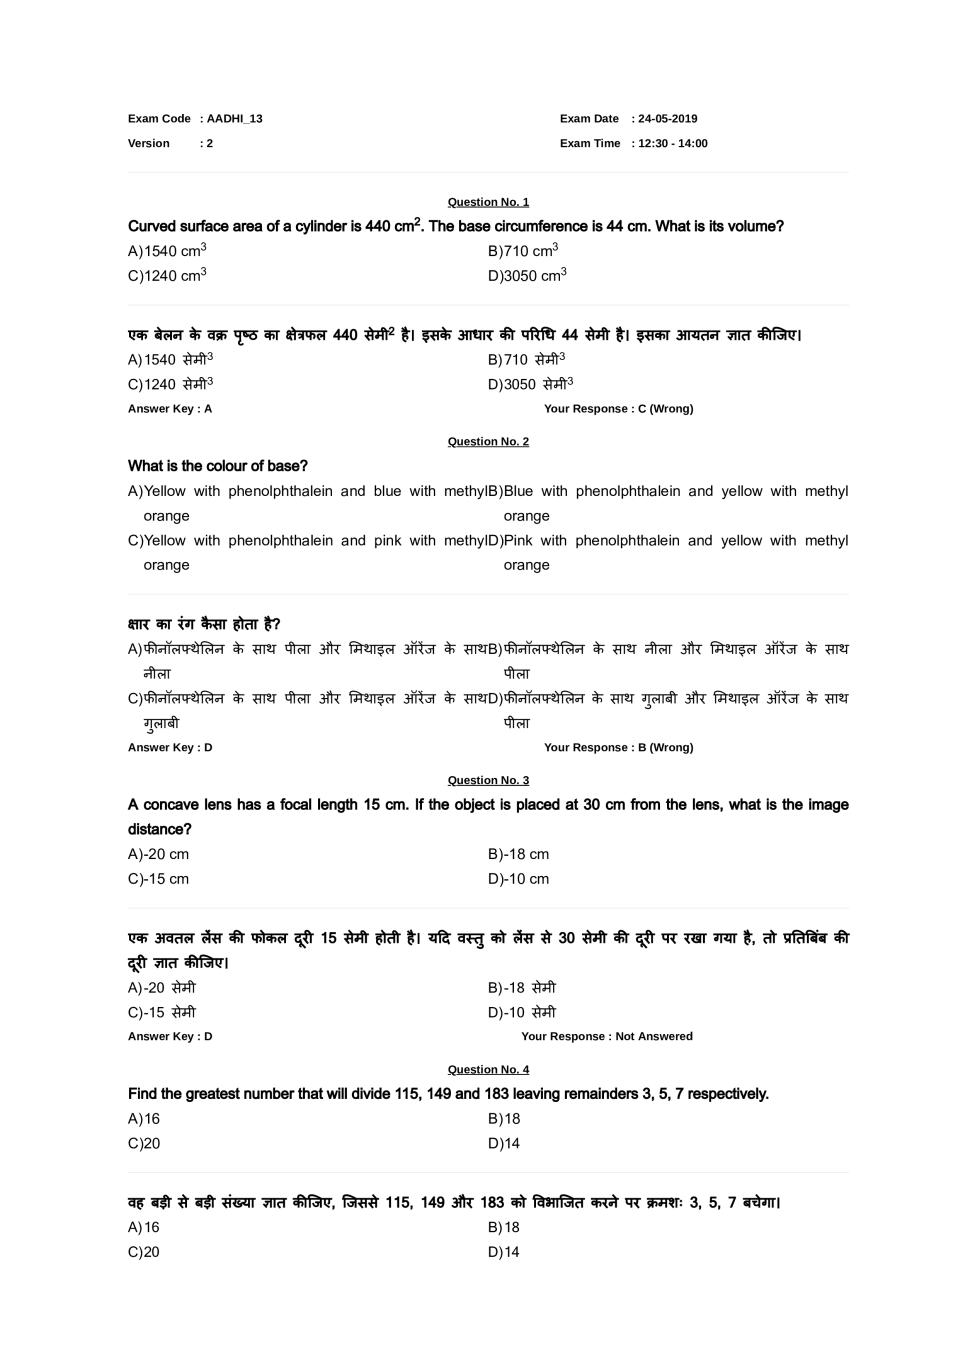 RRB JE Question Paper with Answers for 24 May 2019 Exam Shift 2 - Page 1